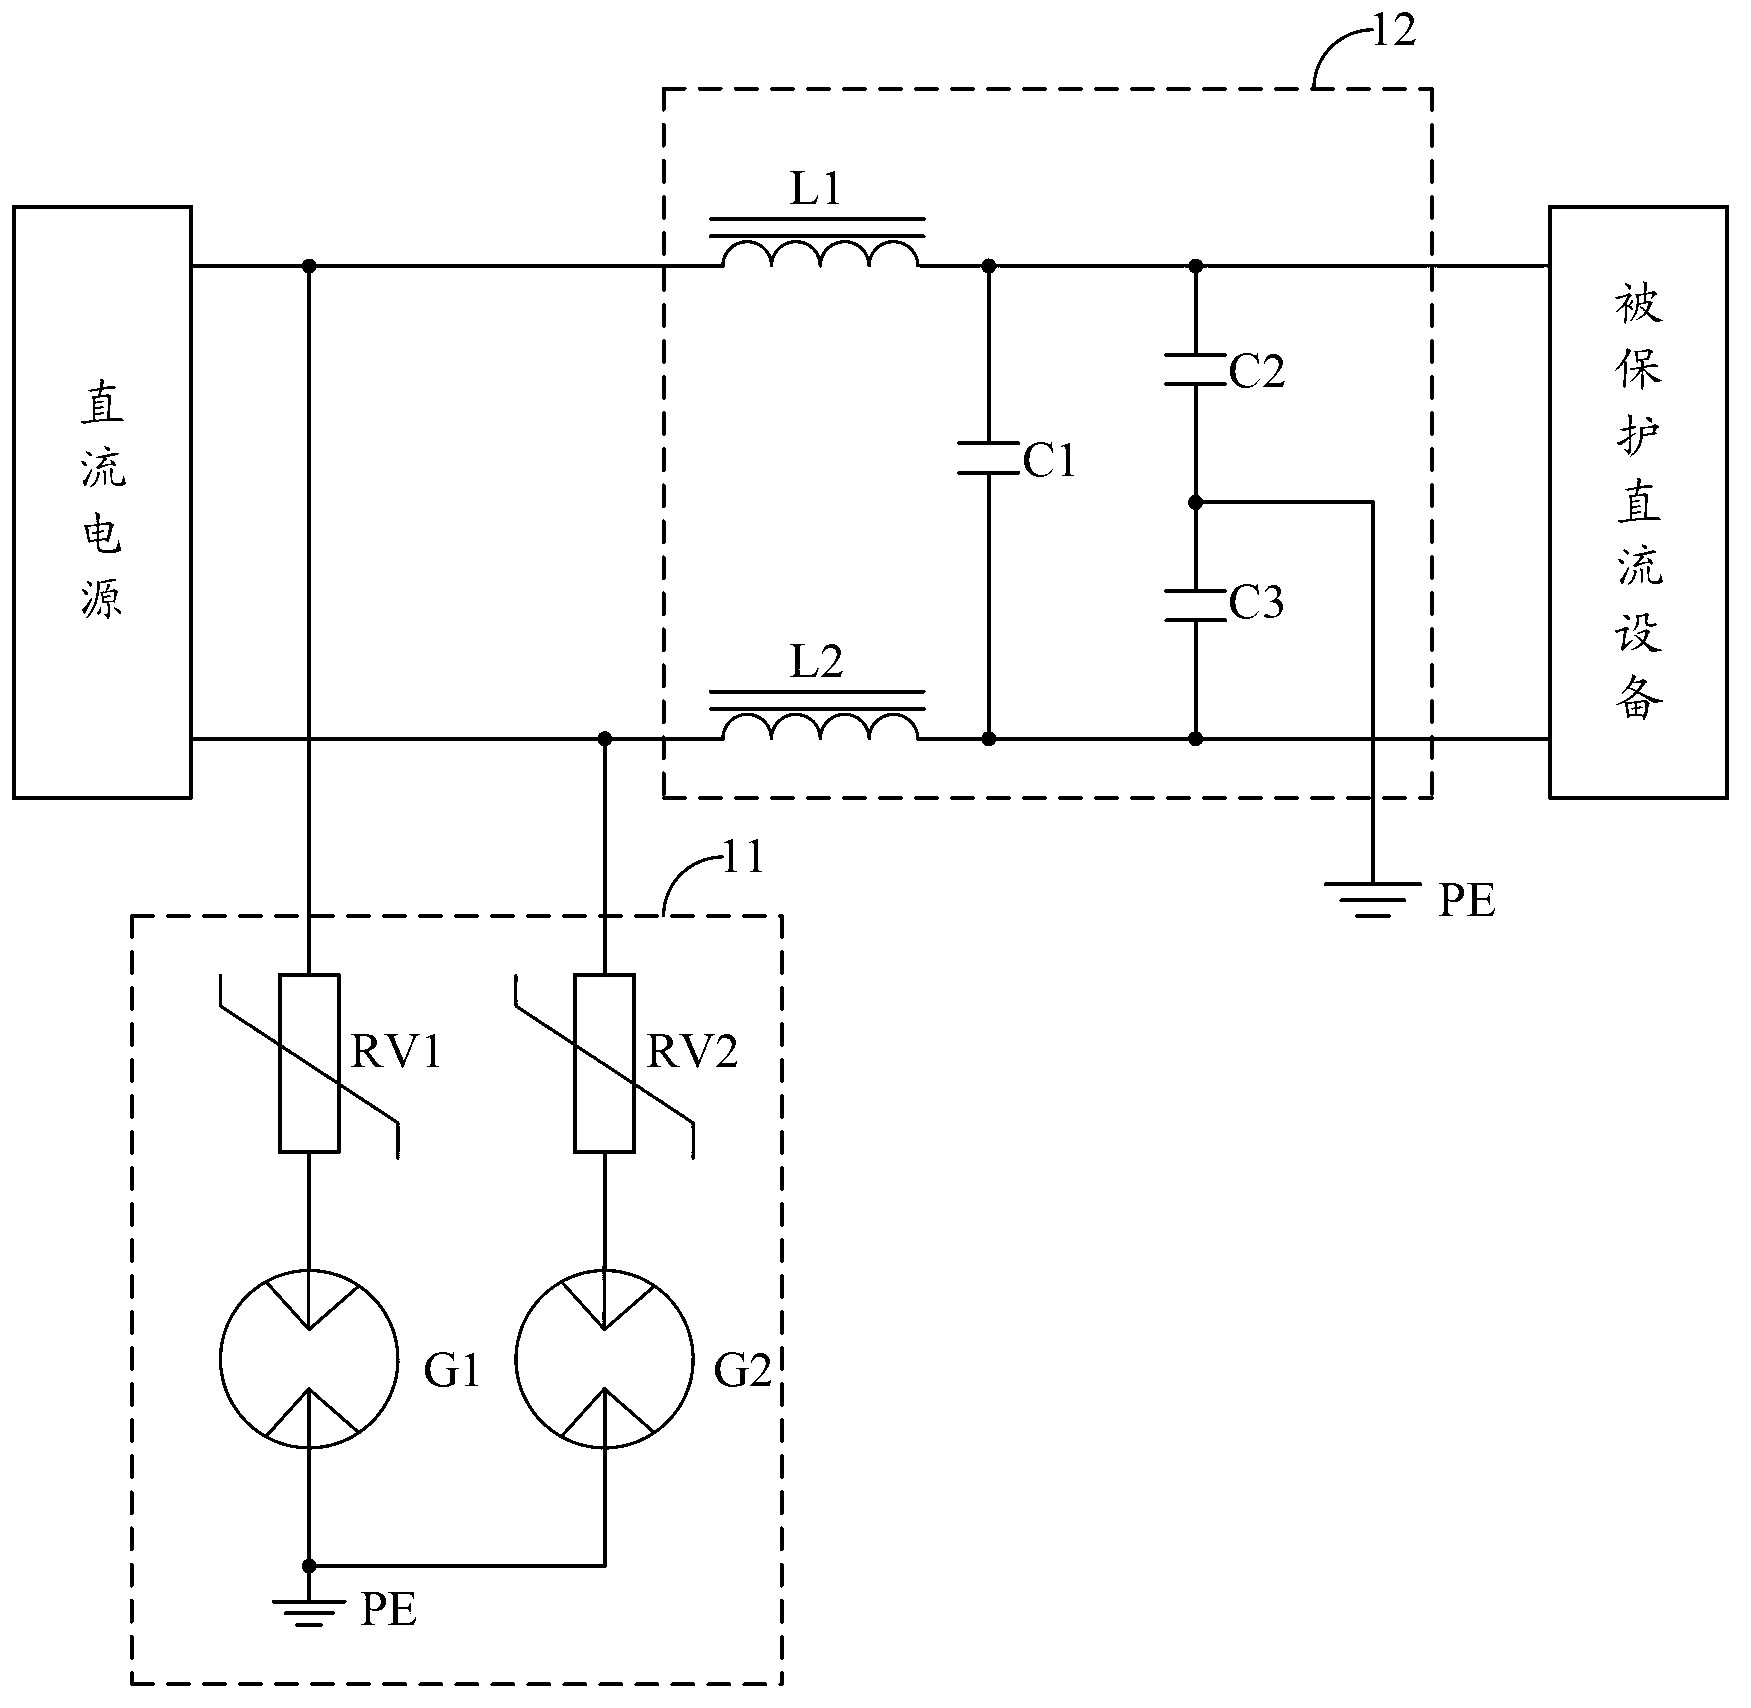 Lightning protection circuit of direct-current system